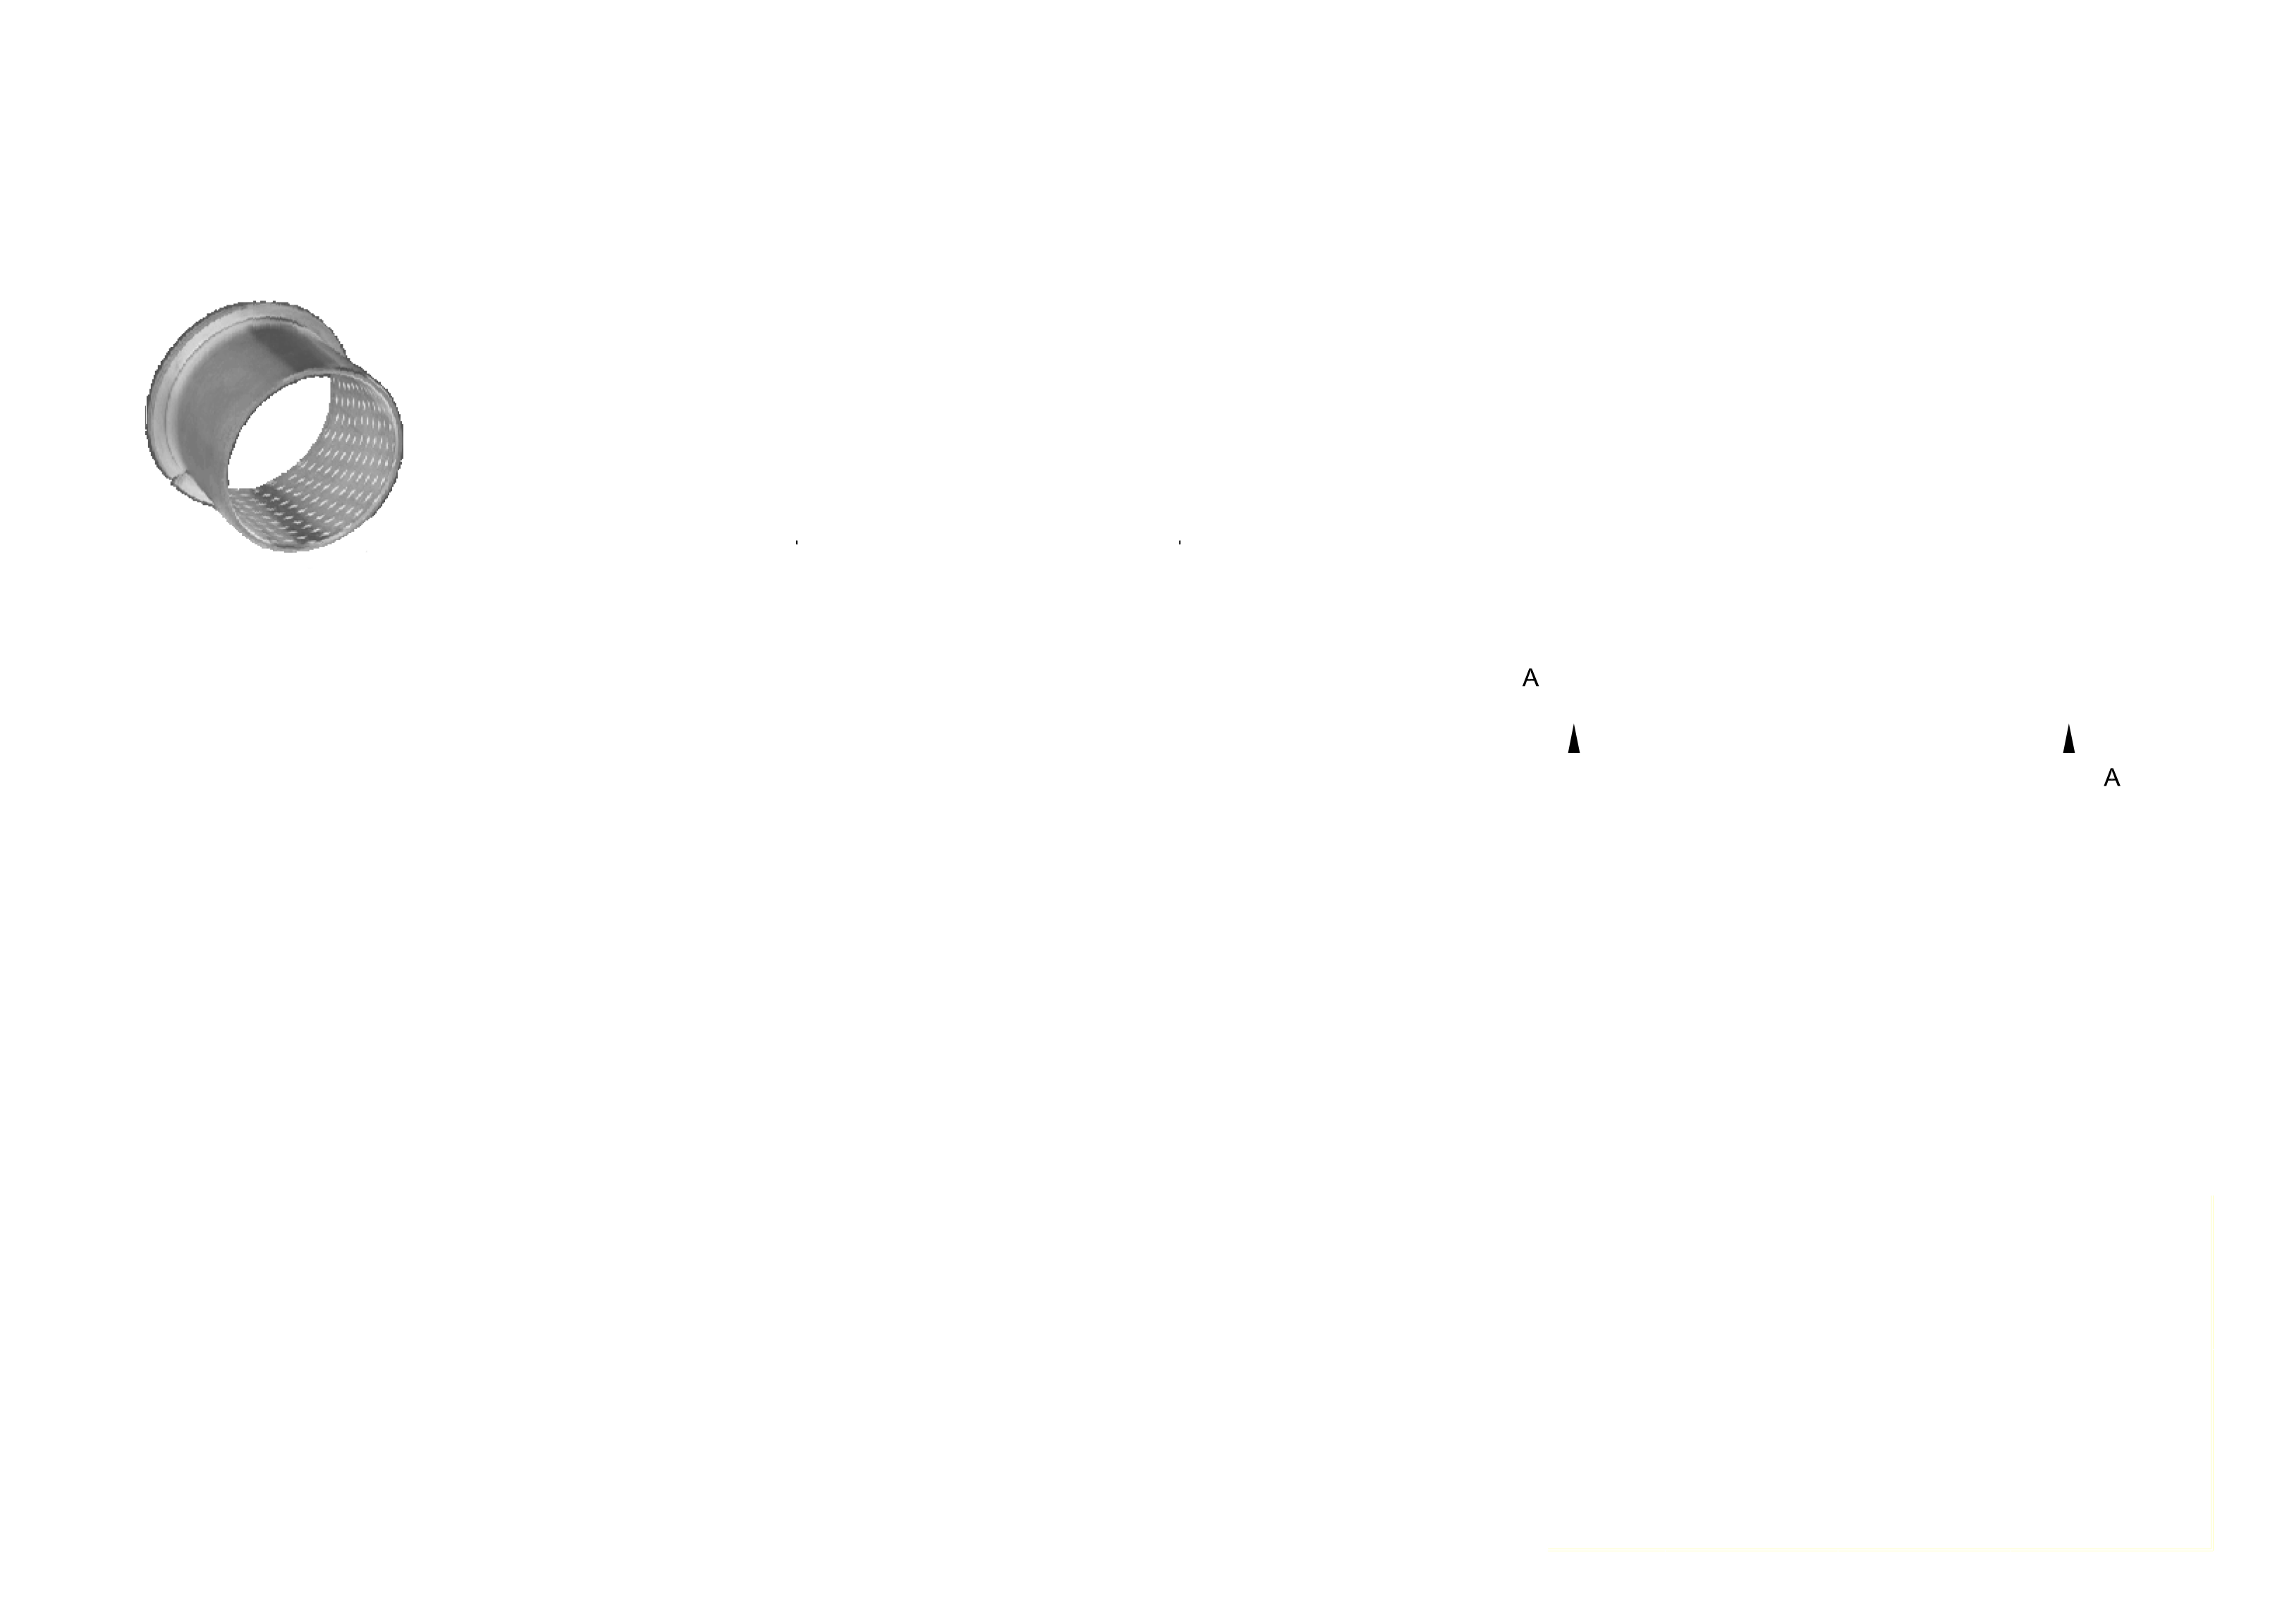 Bronze rolled bearing drawing